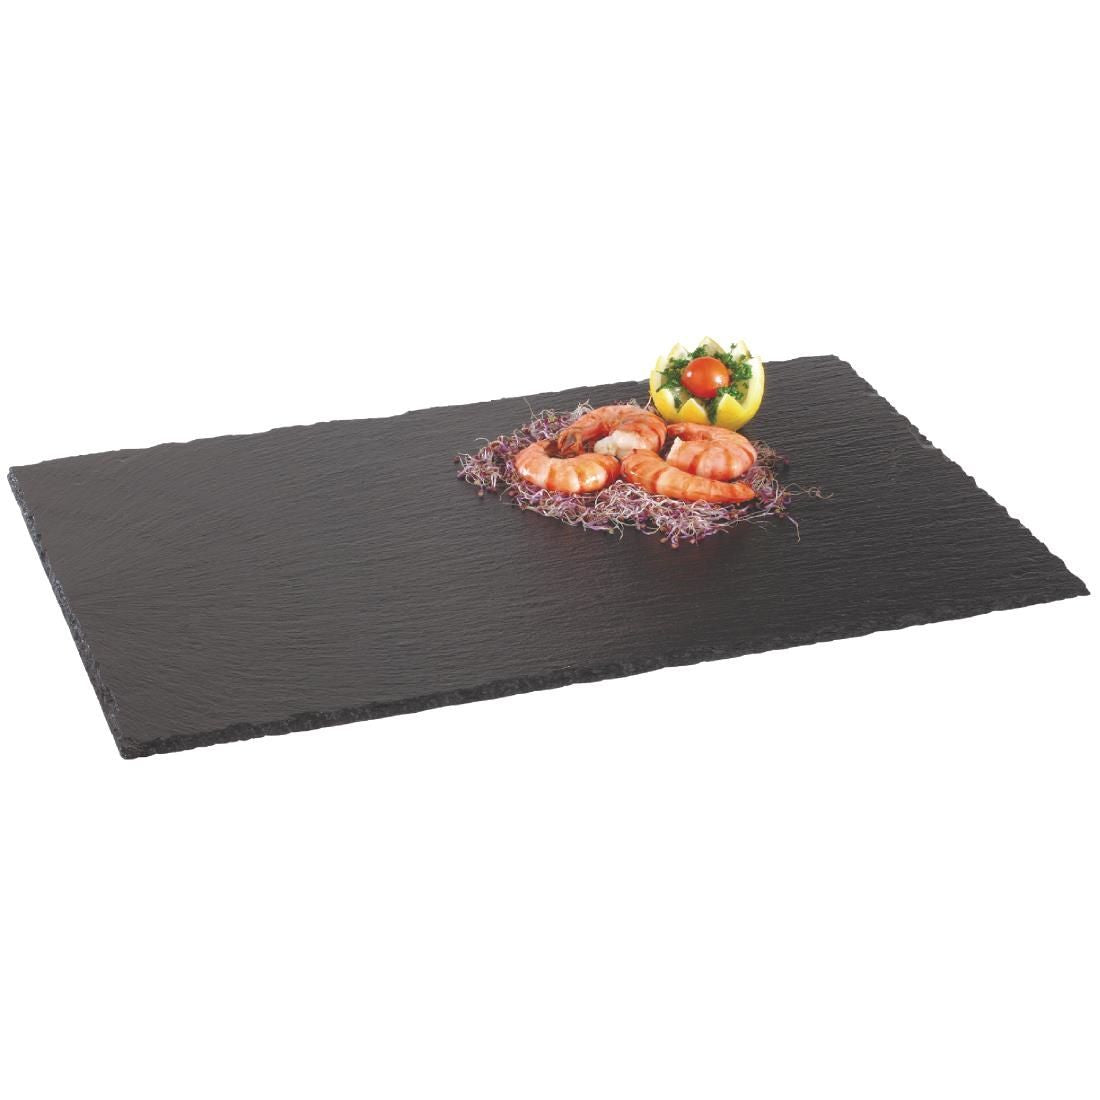 DP160 Olympia Natural Slate Tray GN 1/1 JD Catering Equipment Solutions Ltd